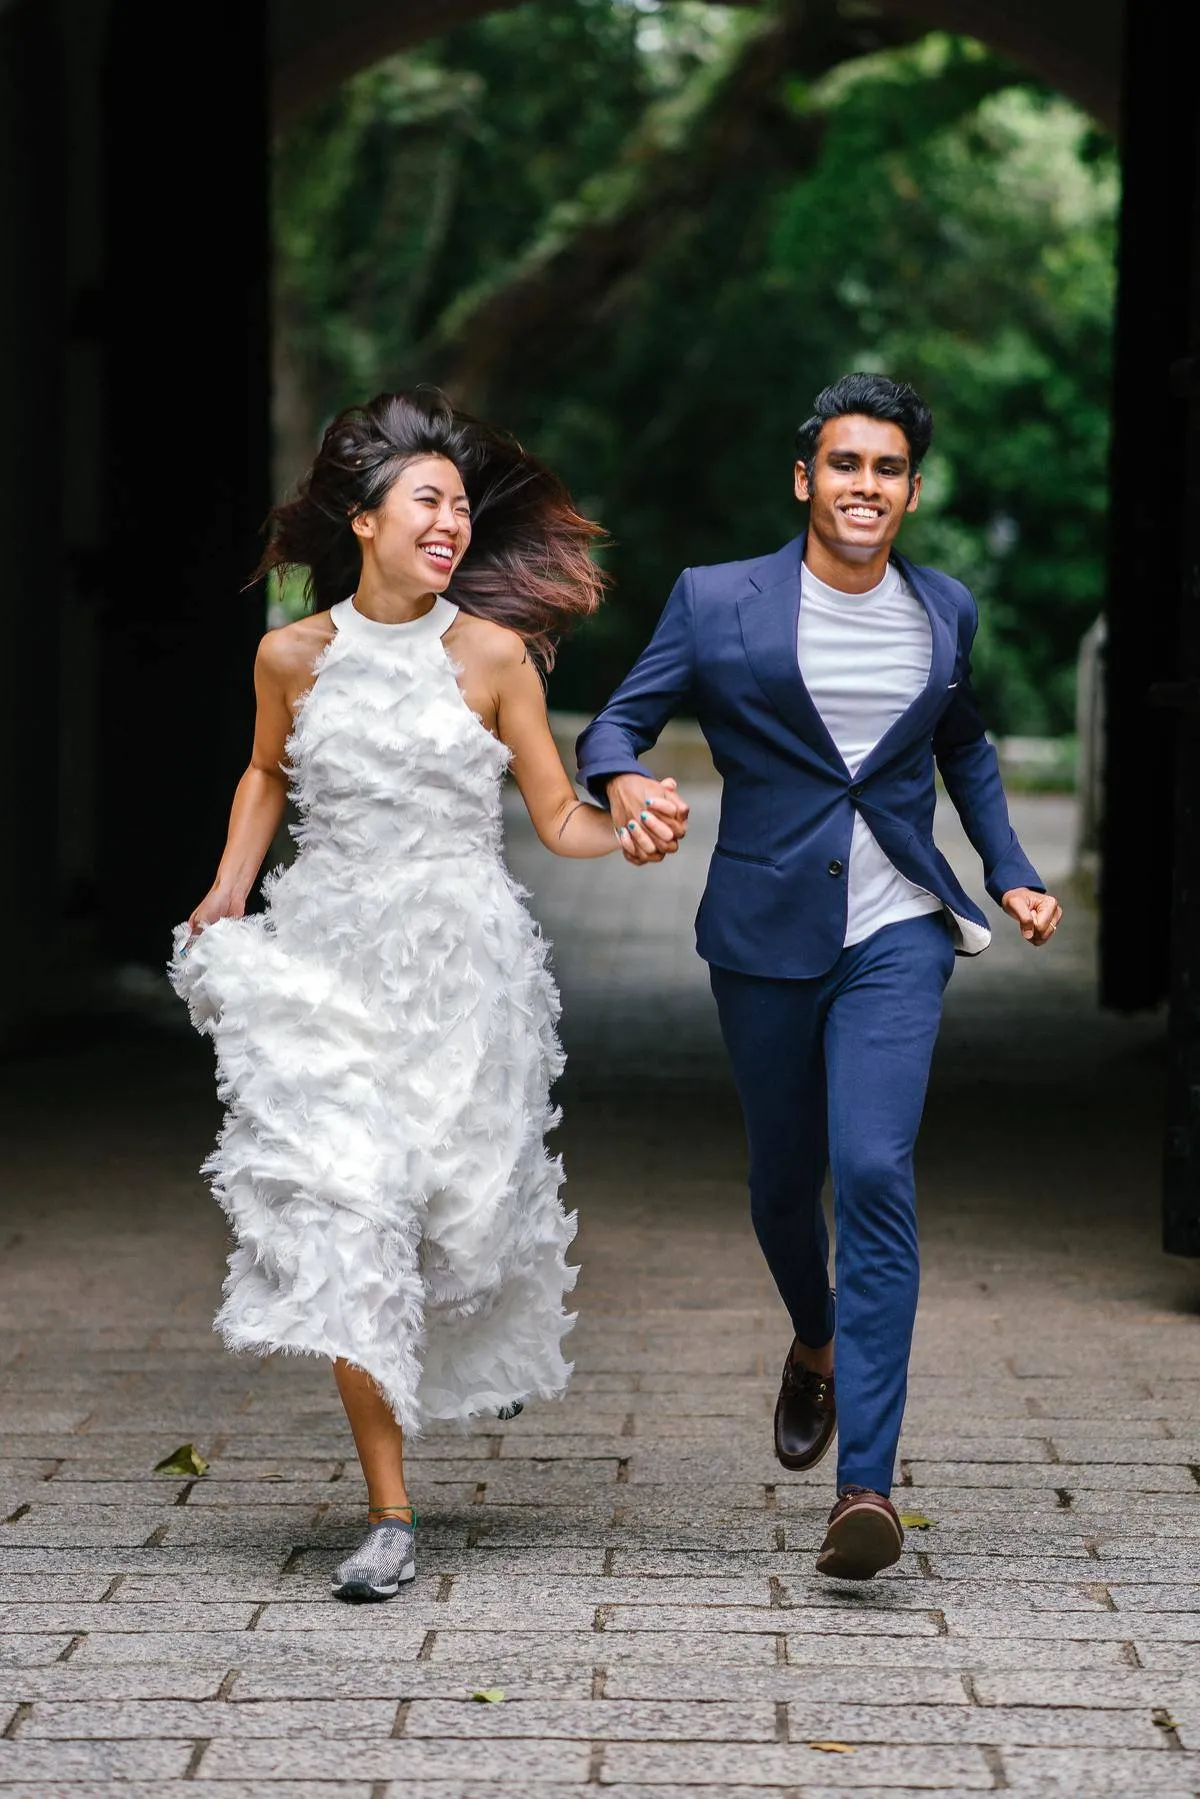 Bride and groom running and laughing together